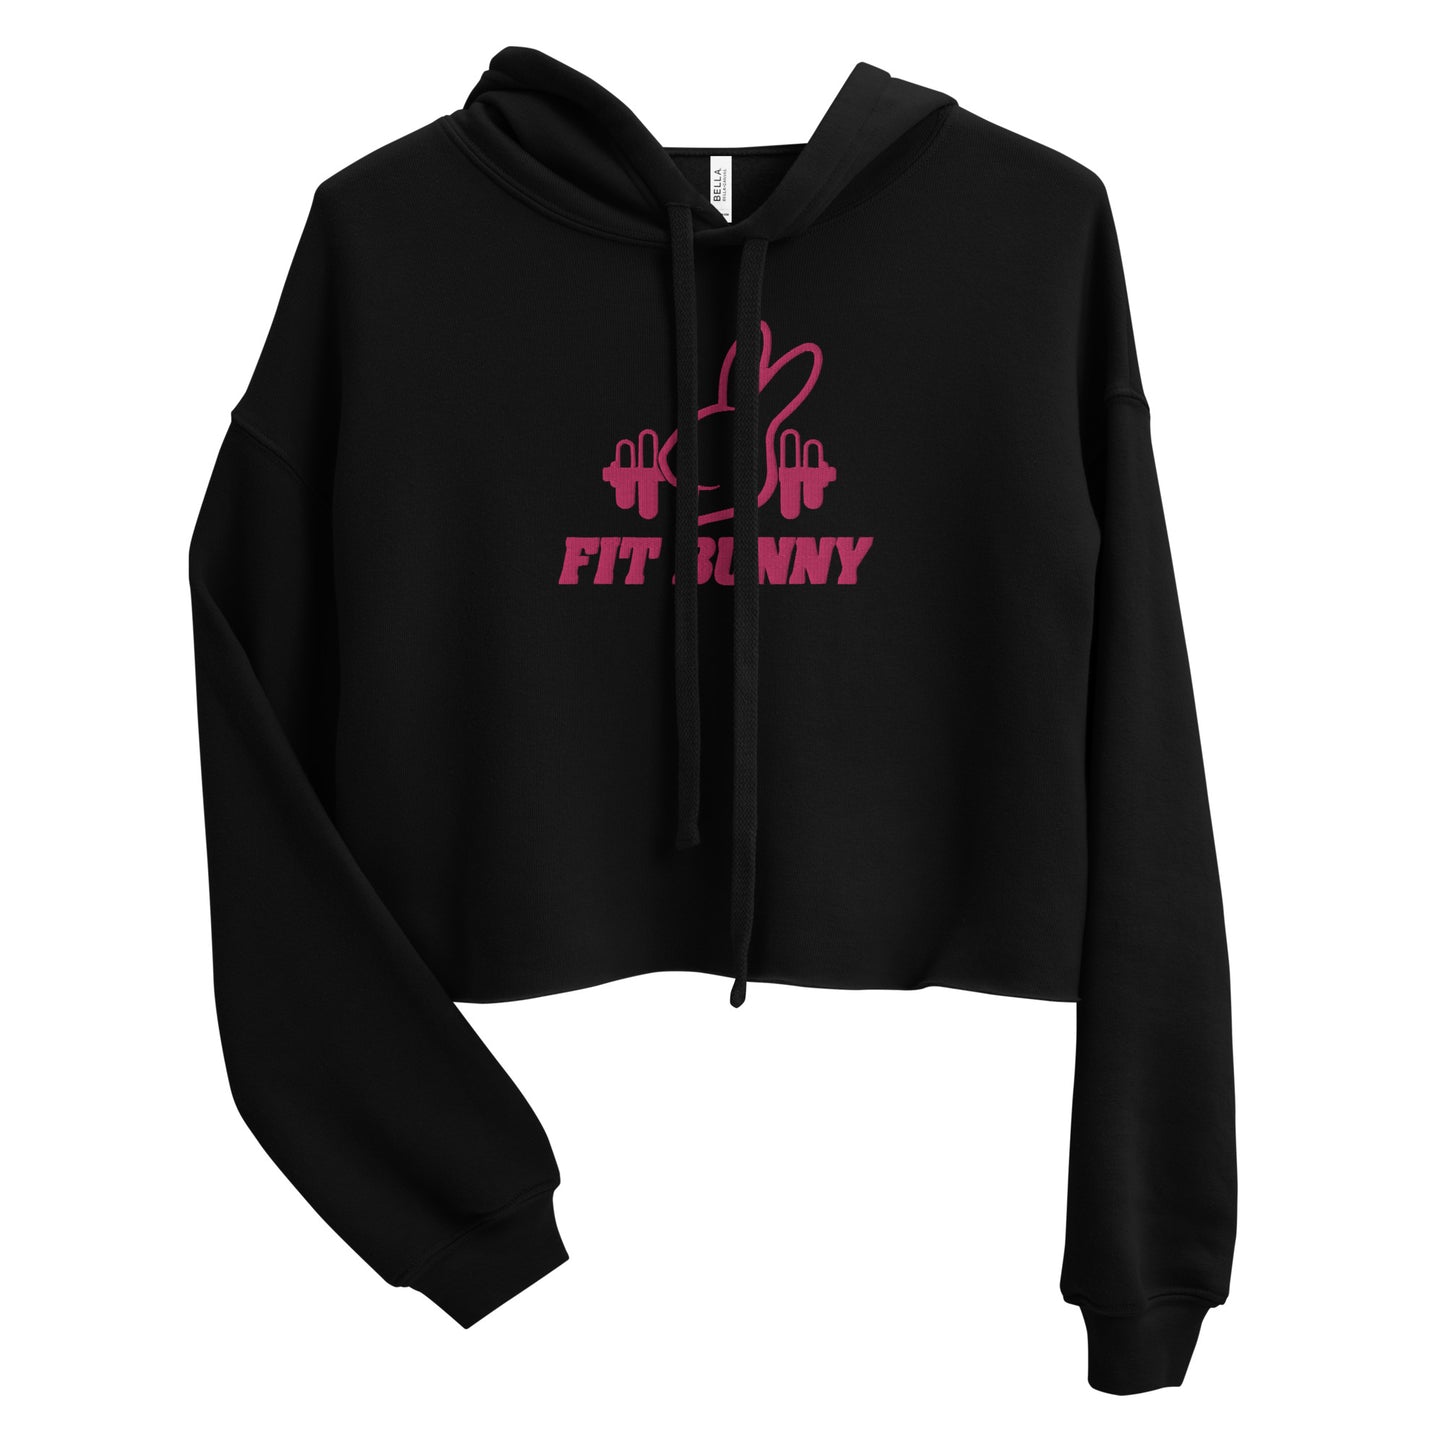 "Fit Bunny" Embroidered Crop Hoodie (Super Soft)